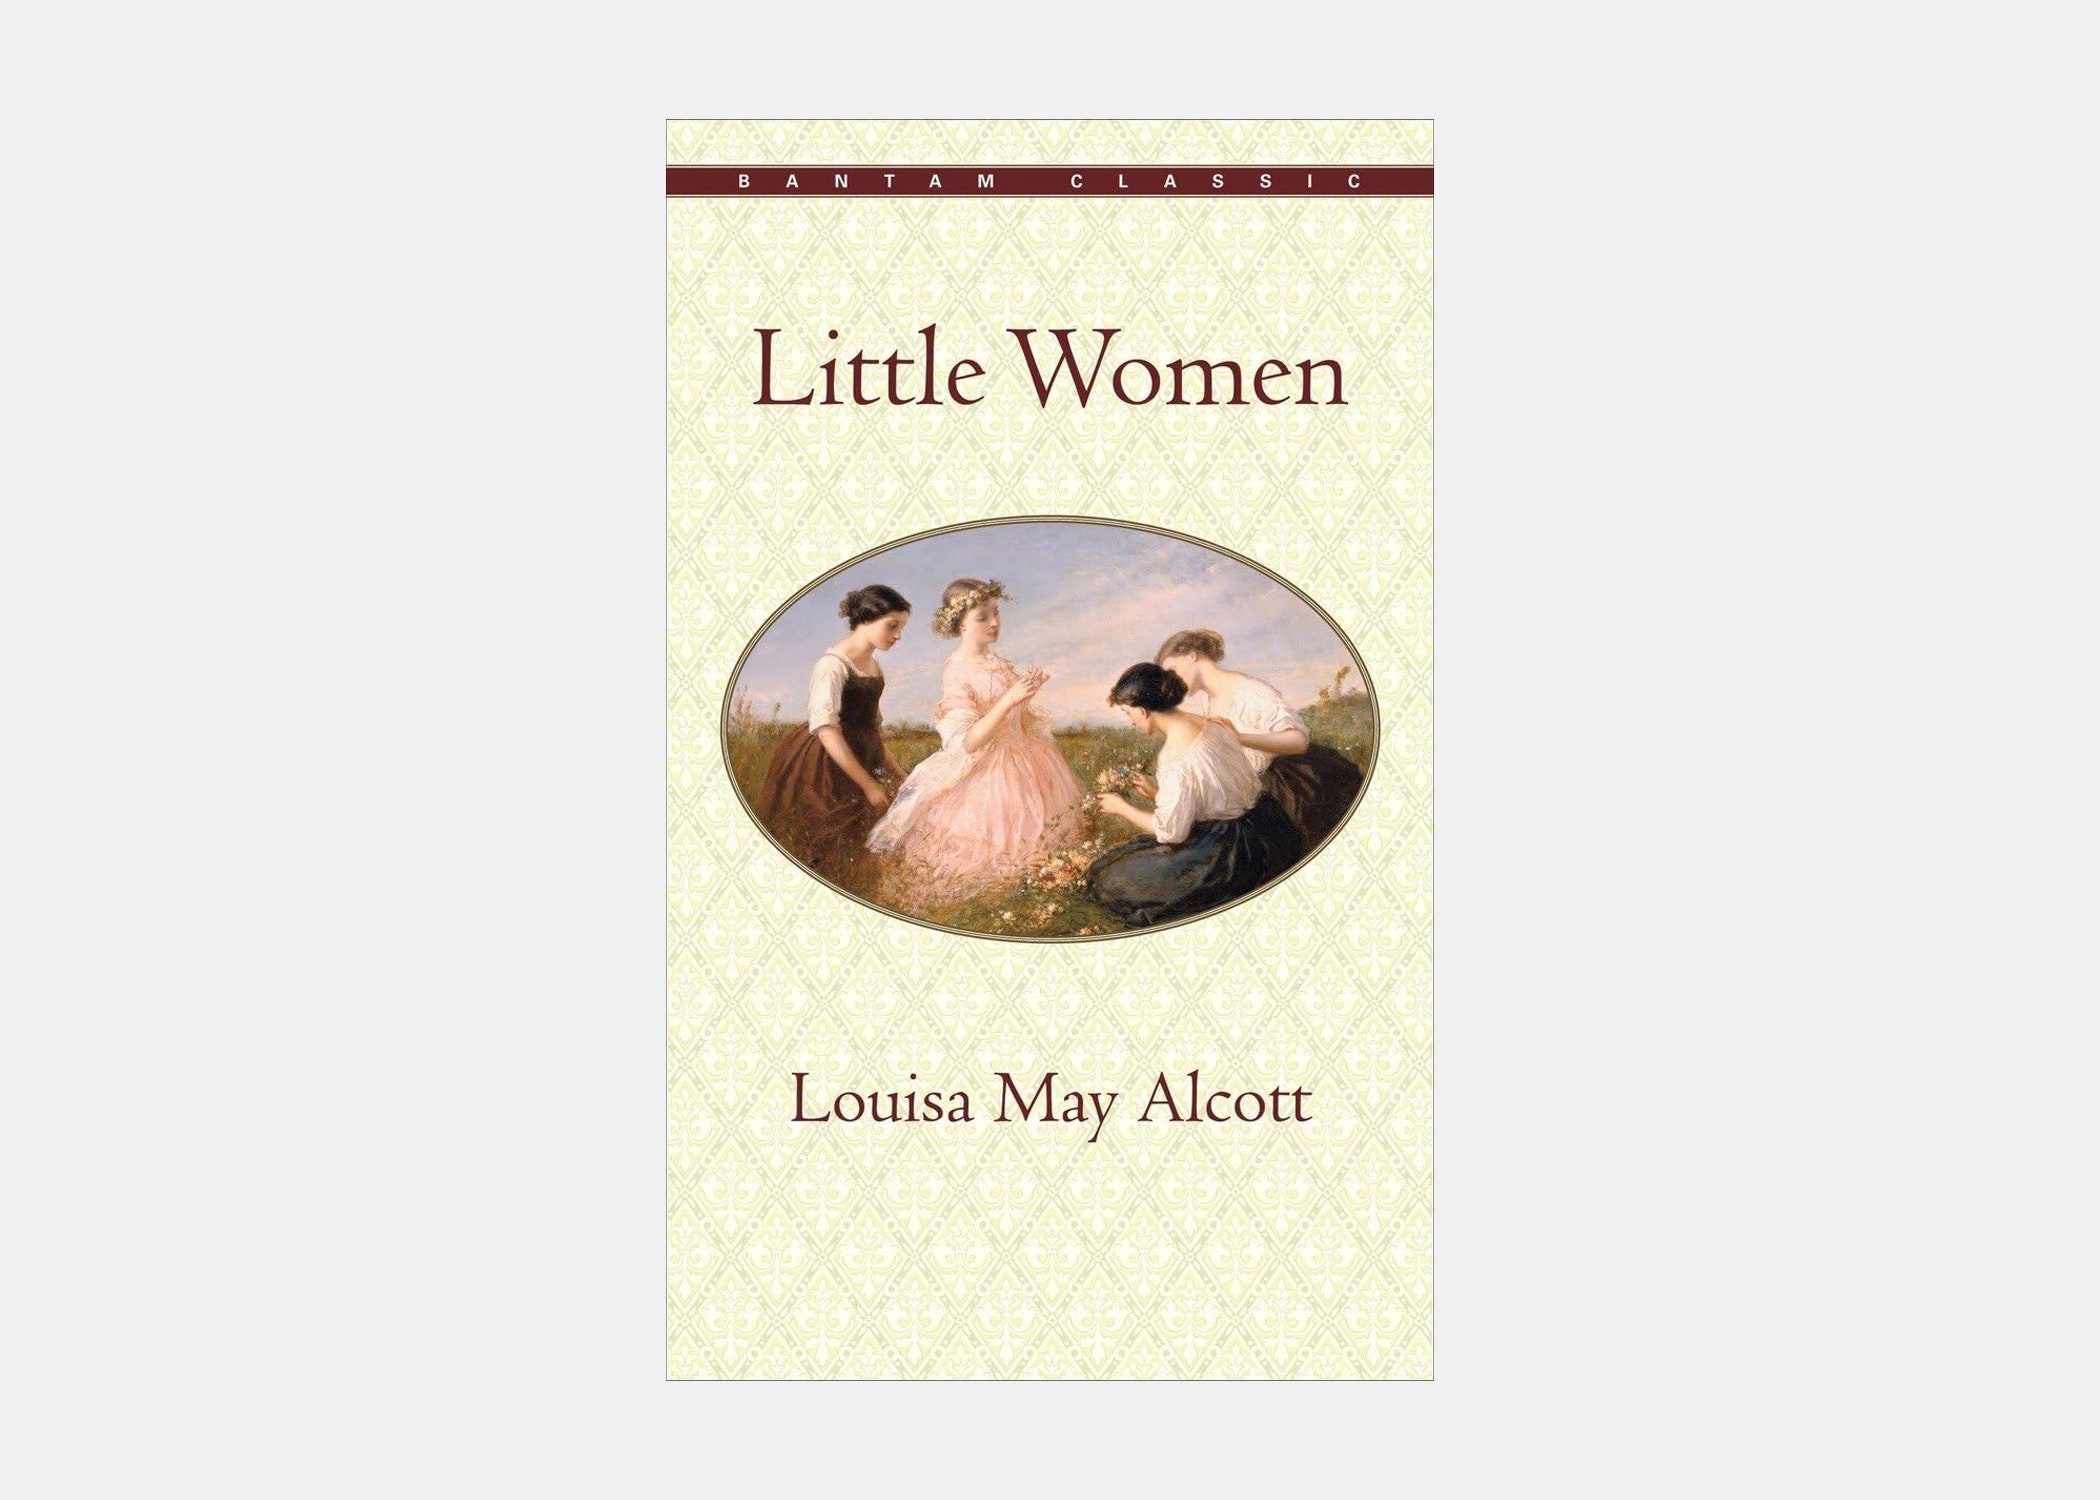 <p><em>Little Women</em> is one of the most beloved books of all time and has been adapted into a movie five times. It deals with themes of feminism, love, forgiveness, and more. You're likely to find this book in airports throughout the country.</p> <p><strong>Page count:</strong> 449</p> <p><strong>Average read time:</strong> 9 hours and 54 minutes</p> $6, Amazon. <a href="https://www.amazon.com/Little-Bantam-Classics-Louisa-Alcott/dp/0553212753/ref=sr_1_1">Get it now!</a><p>Sign up to receive the latest news, expert tips, and inspiration on all things travel</p><a href="https://www.cntraveler.com/newsletter/the-daily?sourceCode=msnsend">Inspire Me</a>